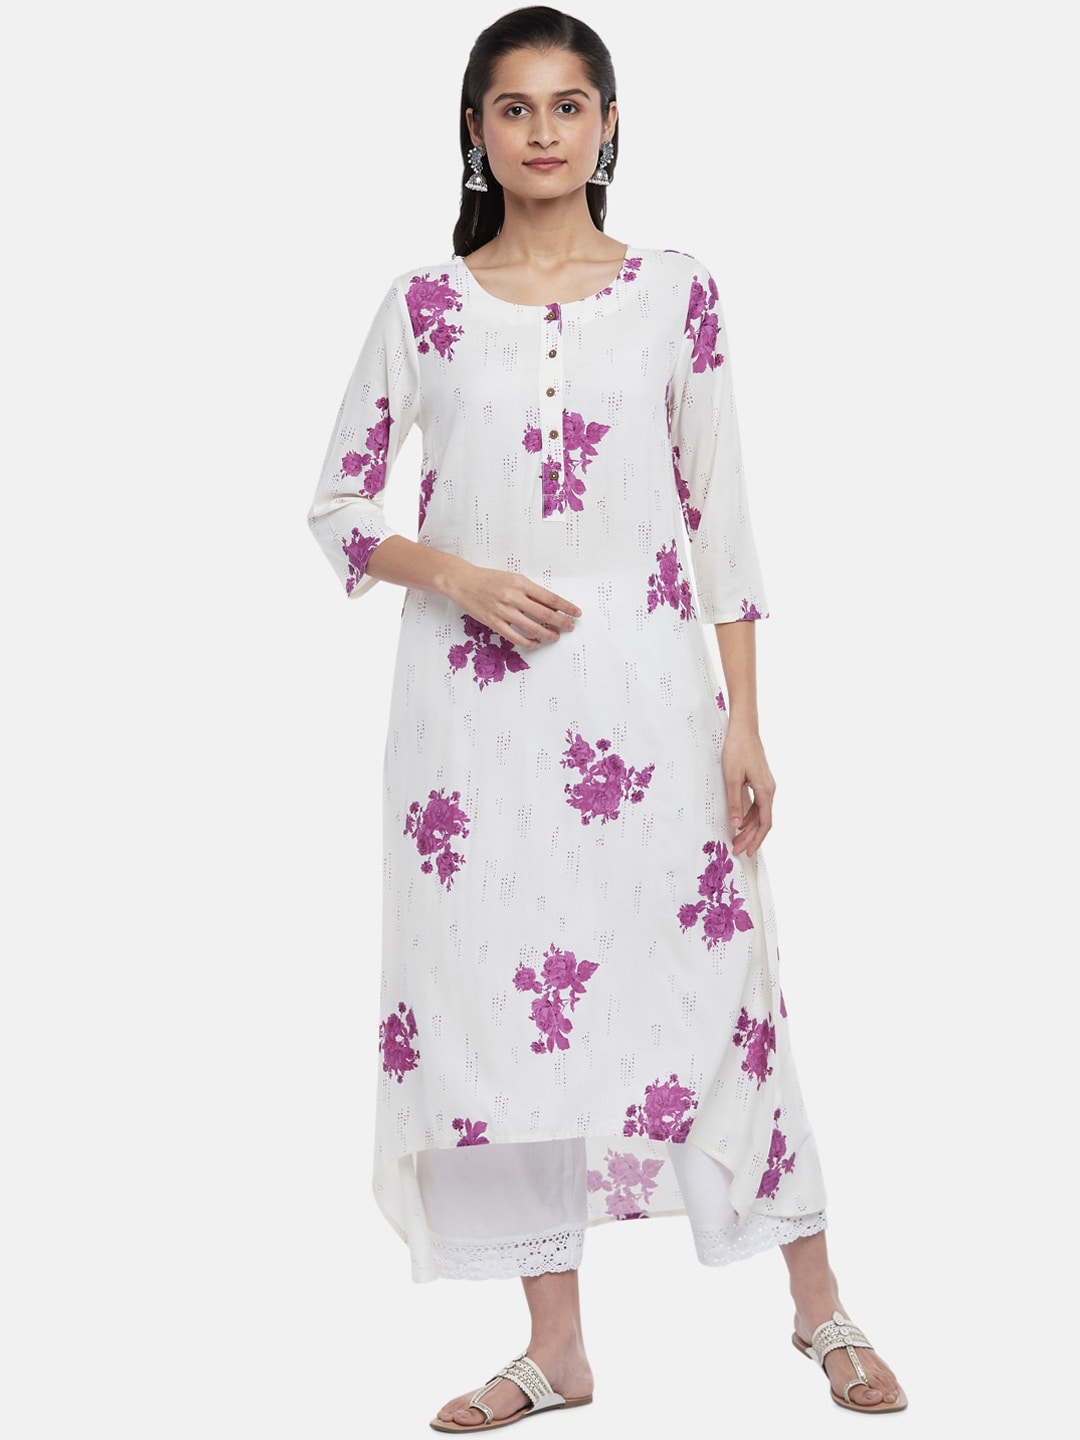 RANGMANCH BY PANTALOONS Women Off White & Purple Floral Printed Floral Kurta Price in India